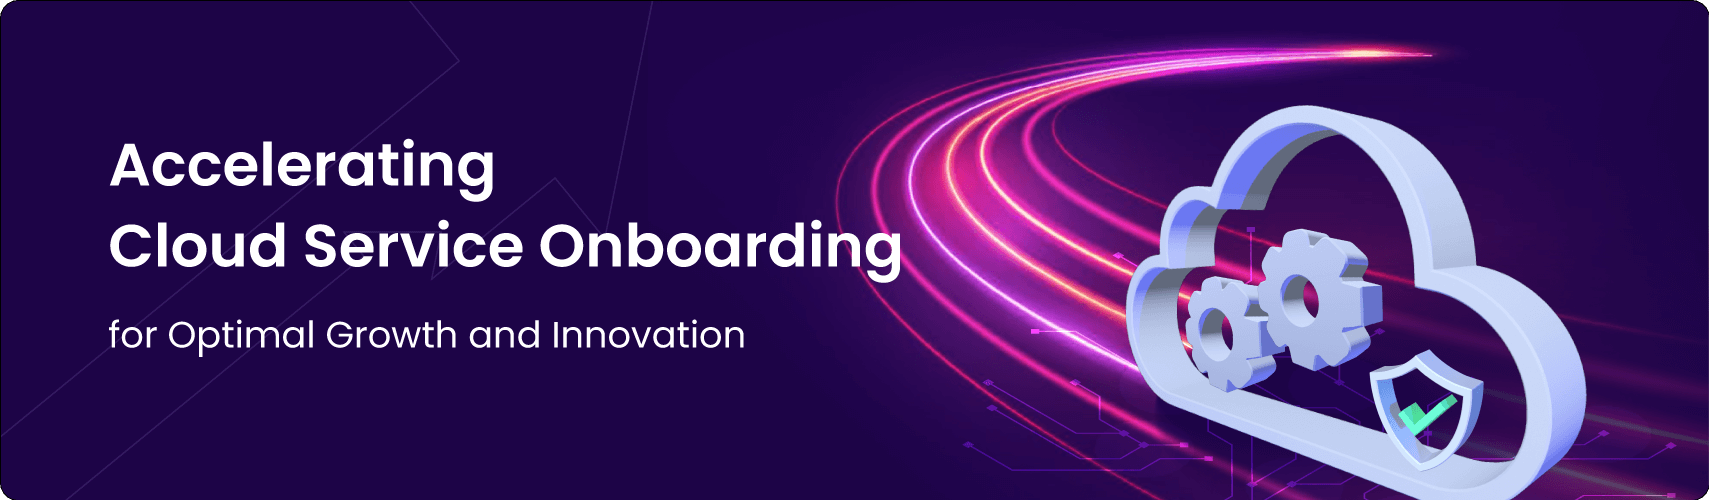 Accelerating Cloud Service Onboarding